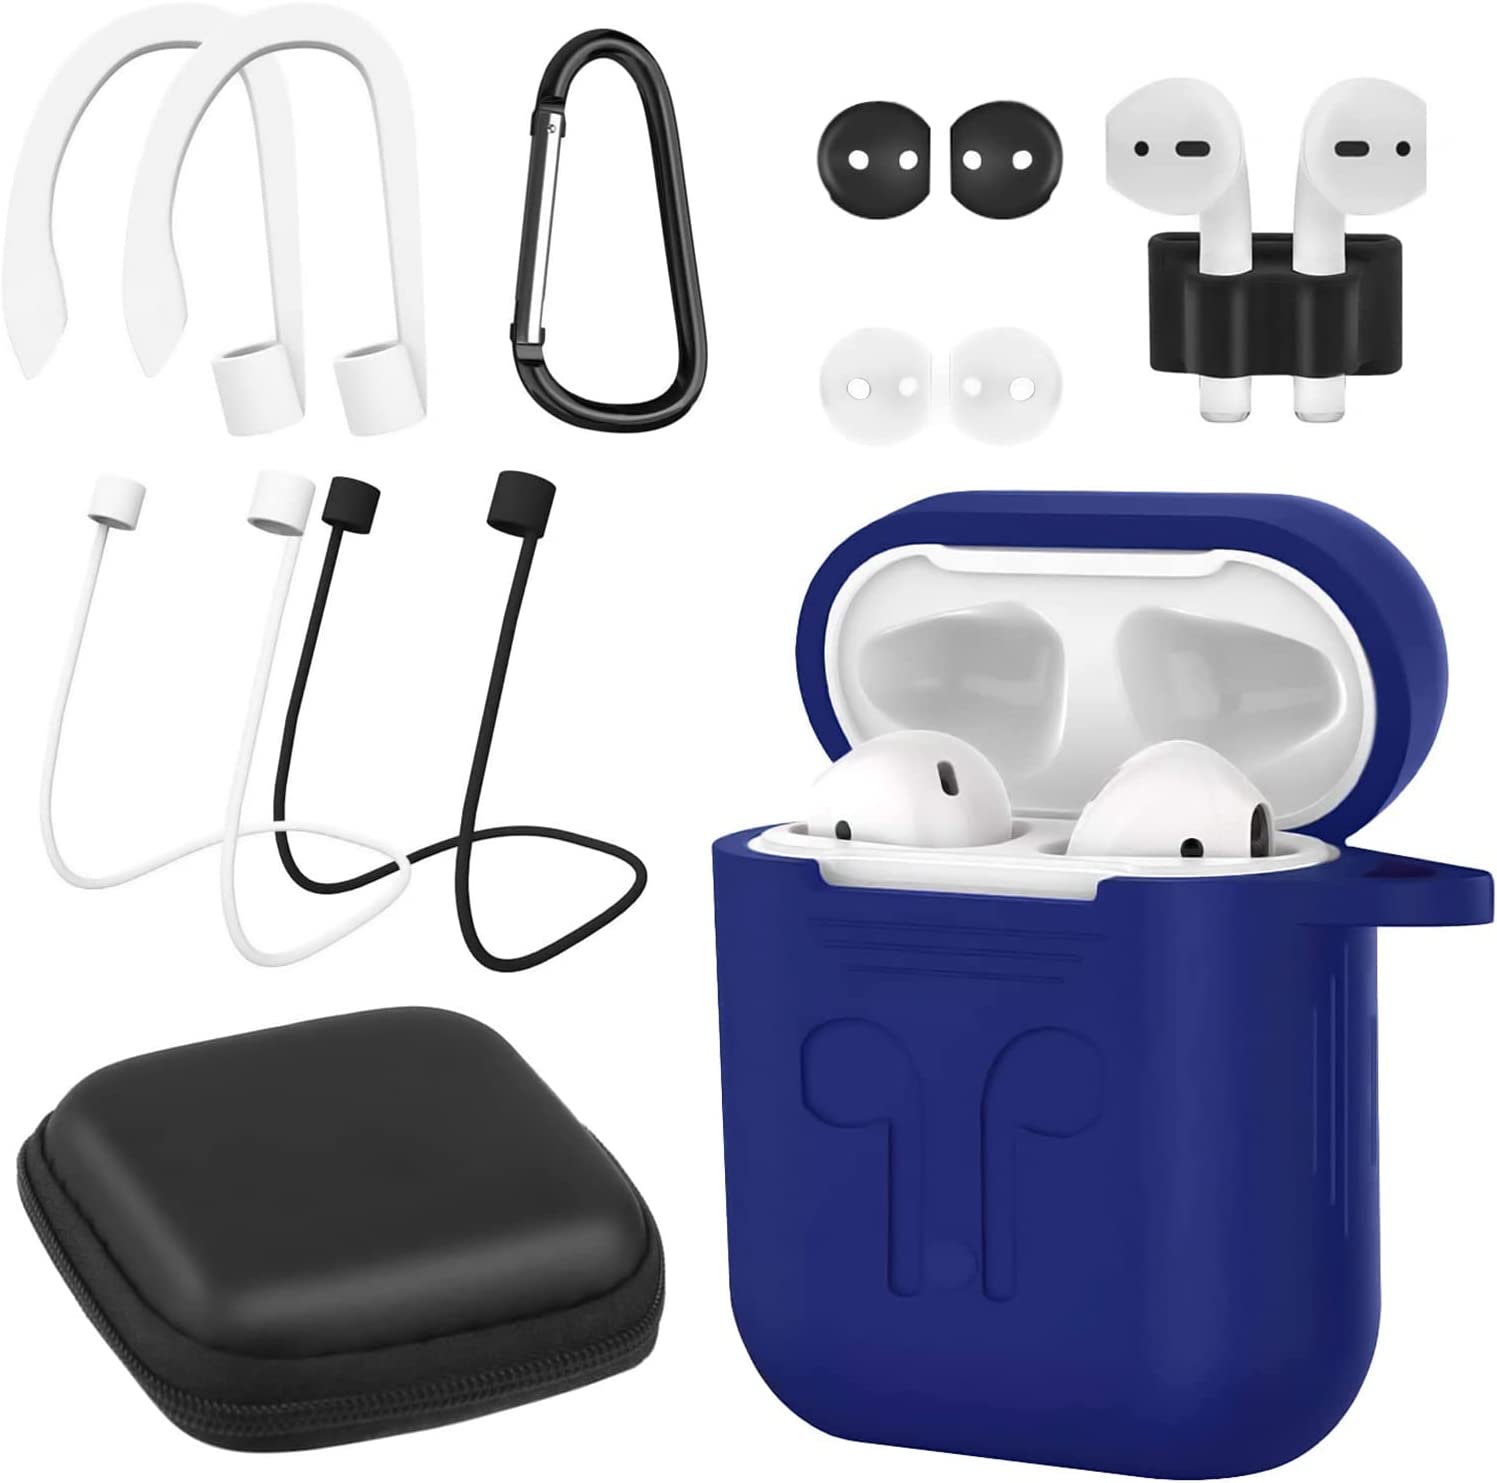 Aunek AirPods Case Cover Soft 9 in 1 Supports Wireless Charging RRP 5.99 CLEARANCE XL 4.99